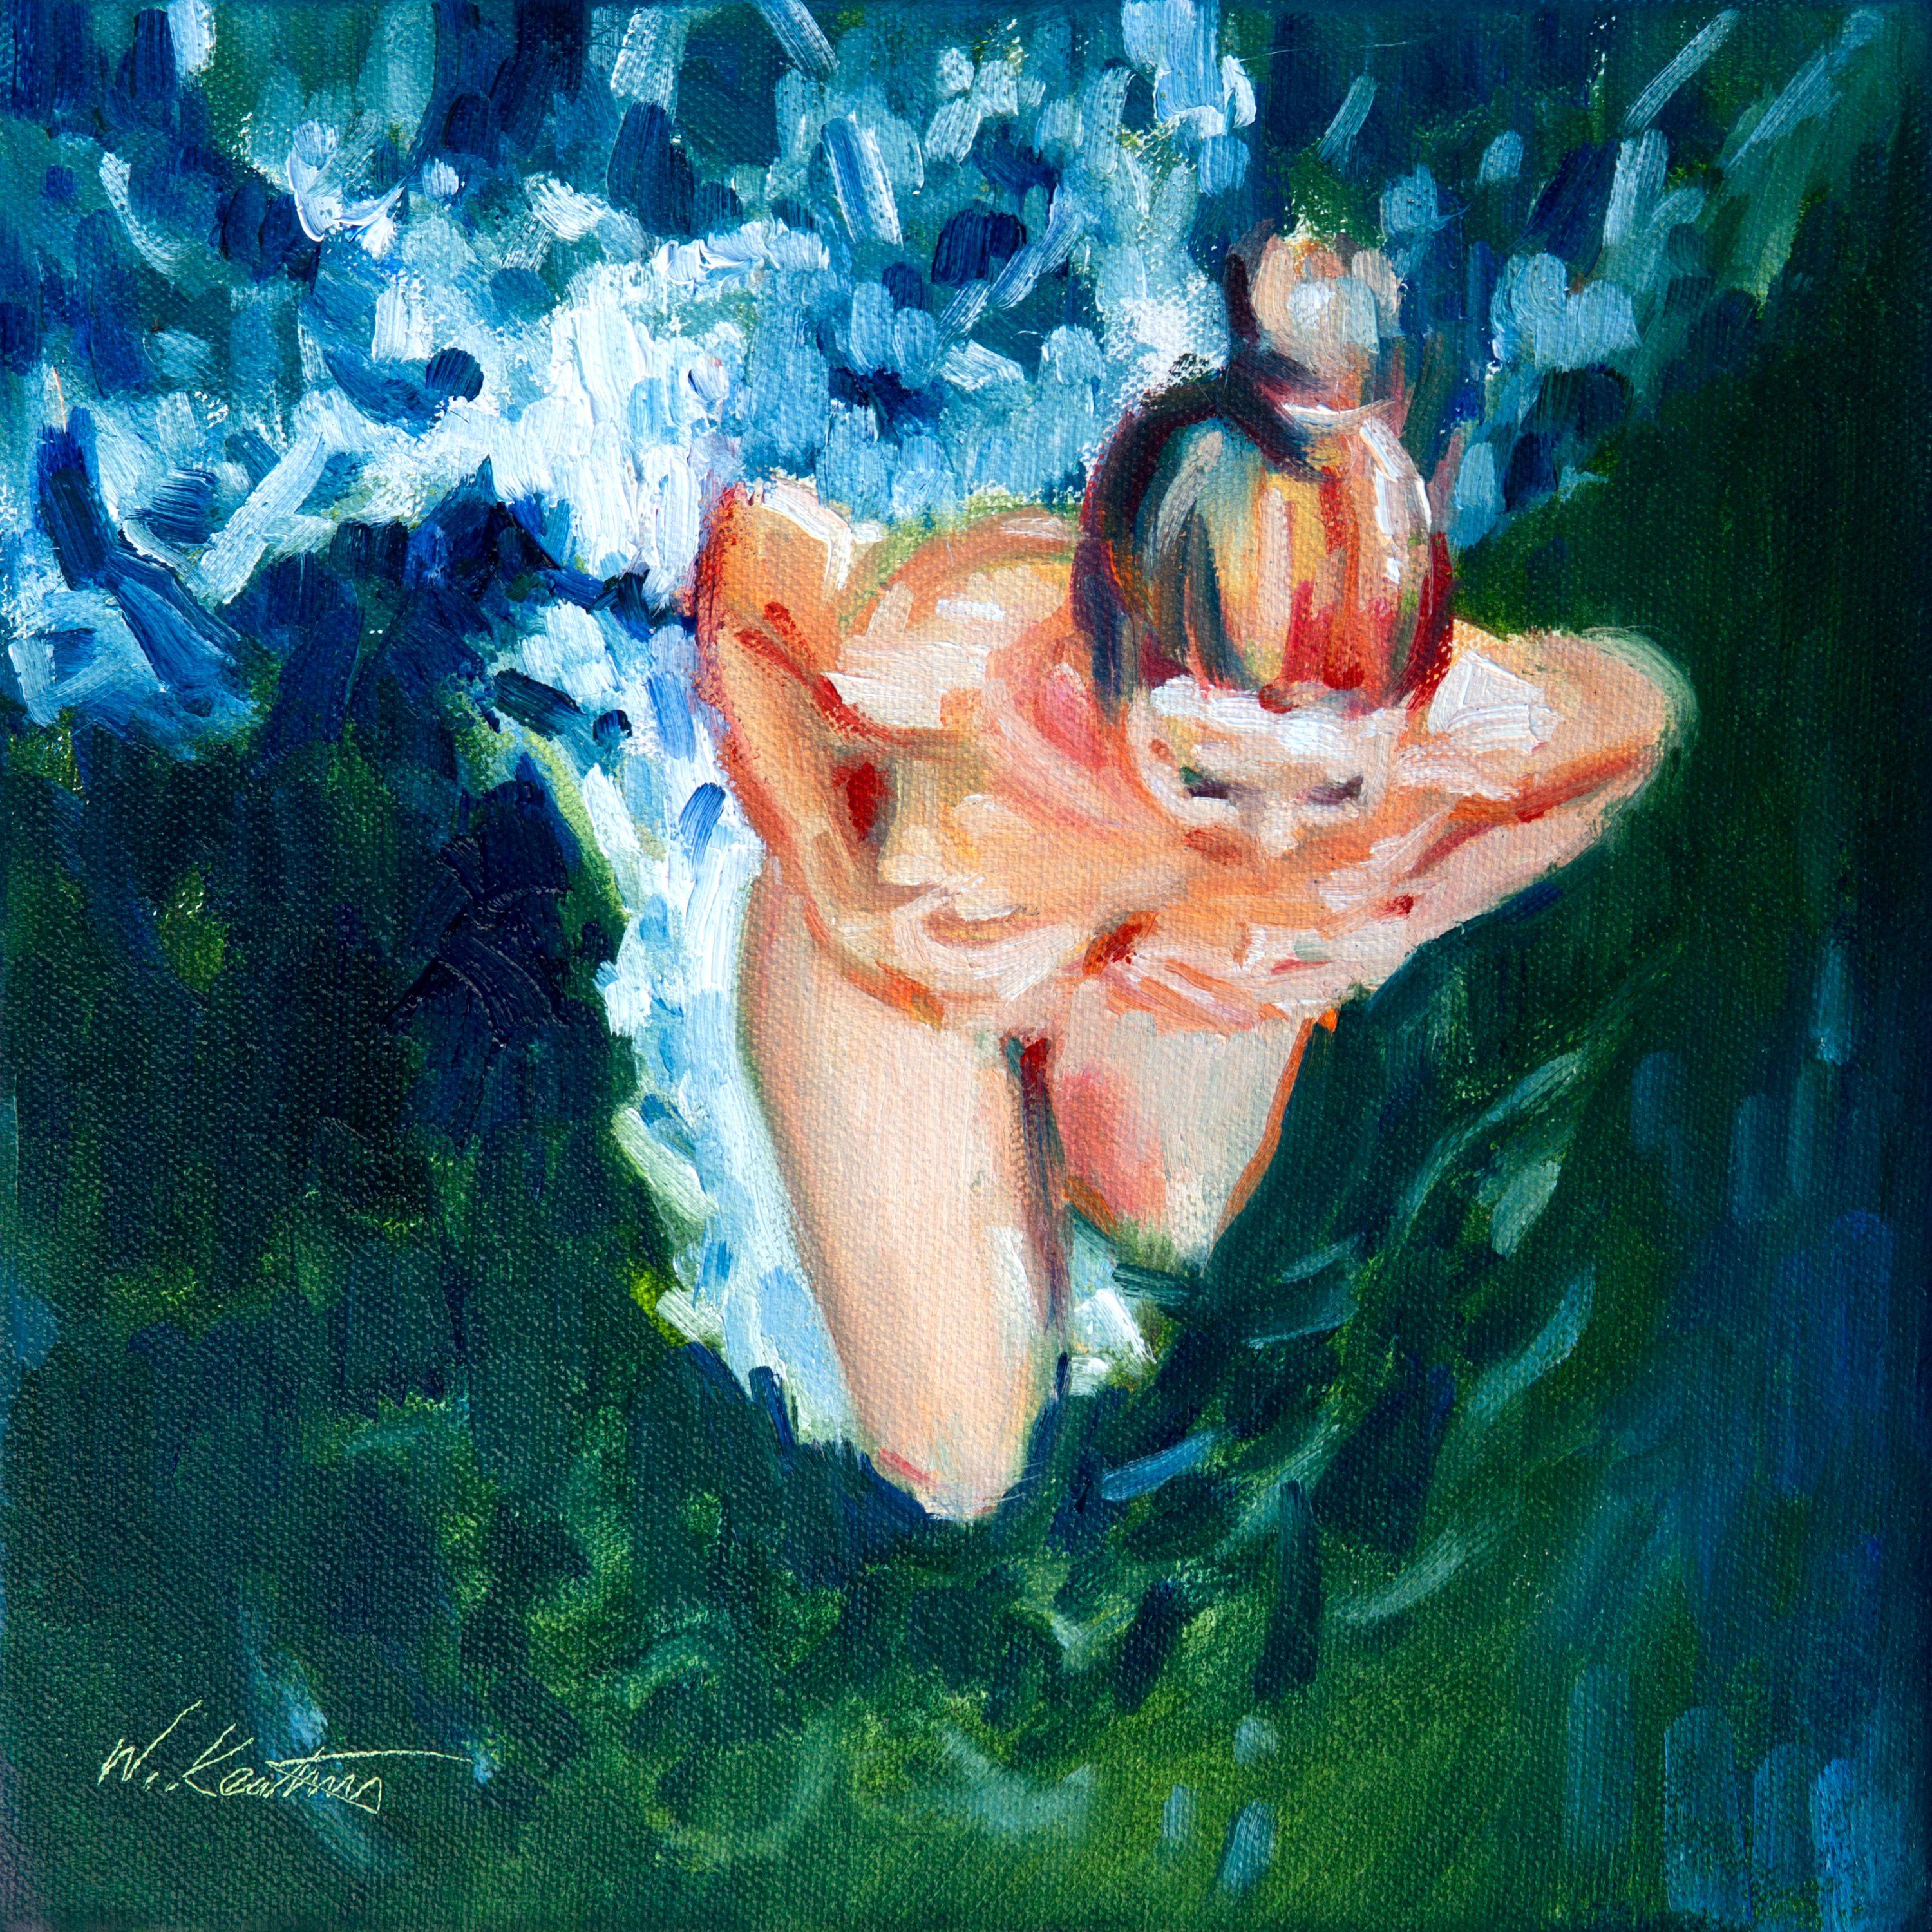 This contemporary figurative painting was inspired by the exhilarating feeling of swimming in a cool mountain lake in summer. My unusual perspective makes the composition more abstract and my signature style creates the motion of the figure and